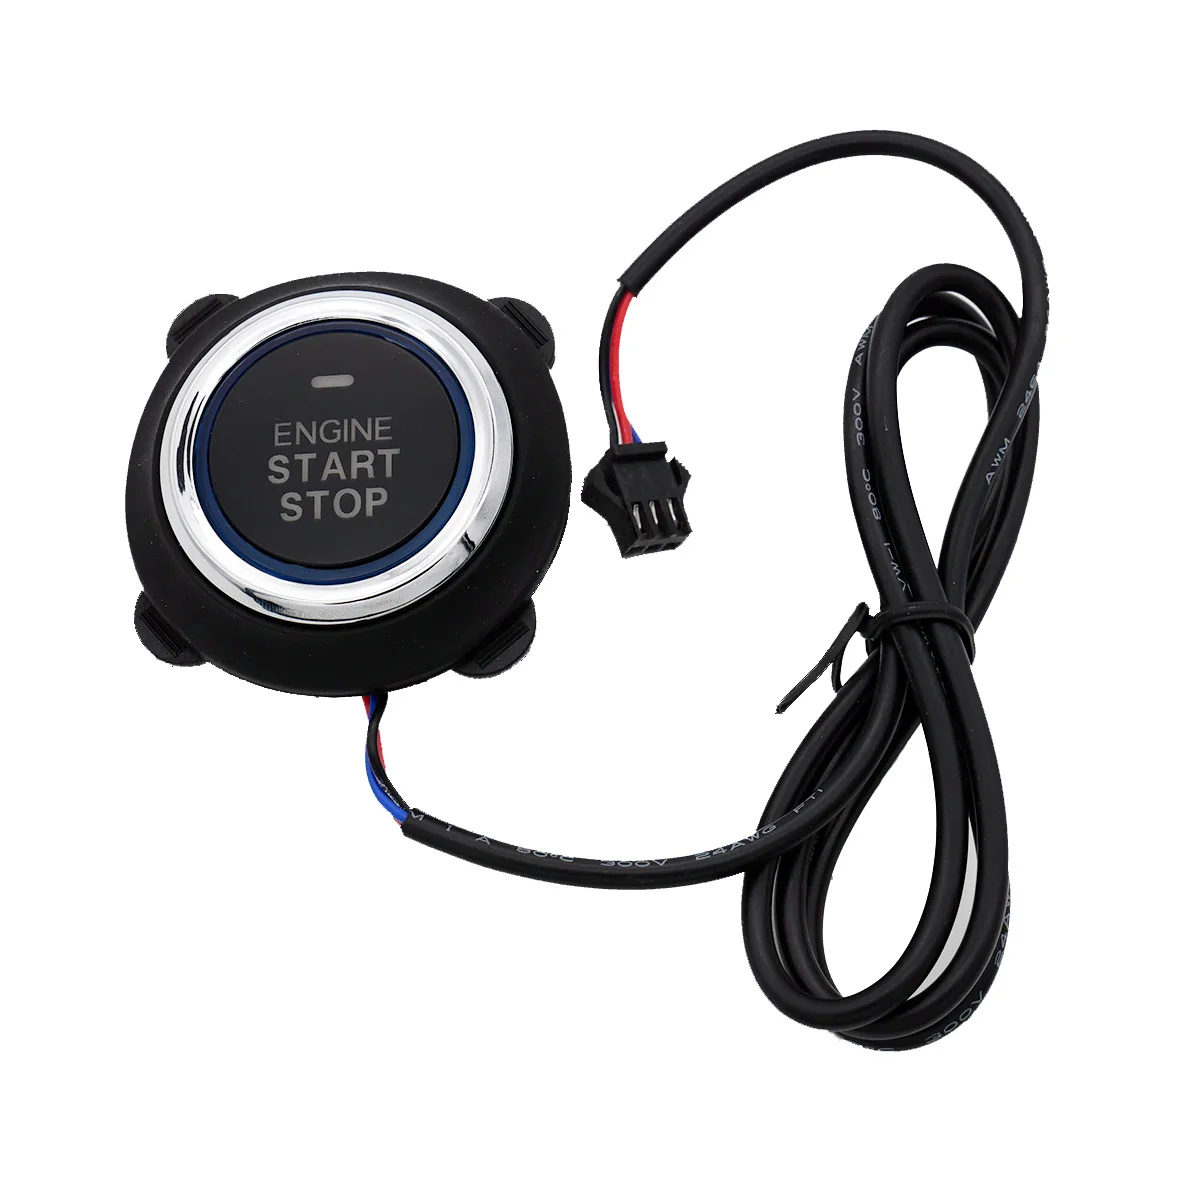 The new motorcycle Bluetooth anti-theft device mobile APP can control the automatic induction anti-theft unlock with one click